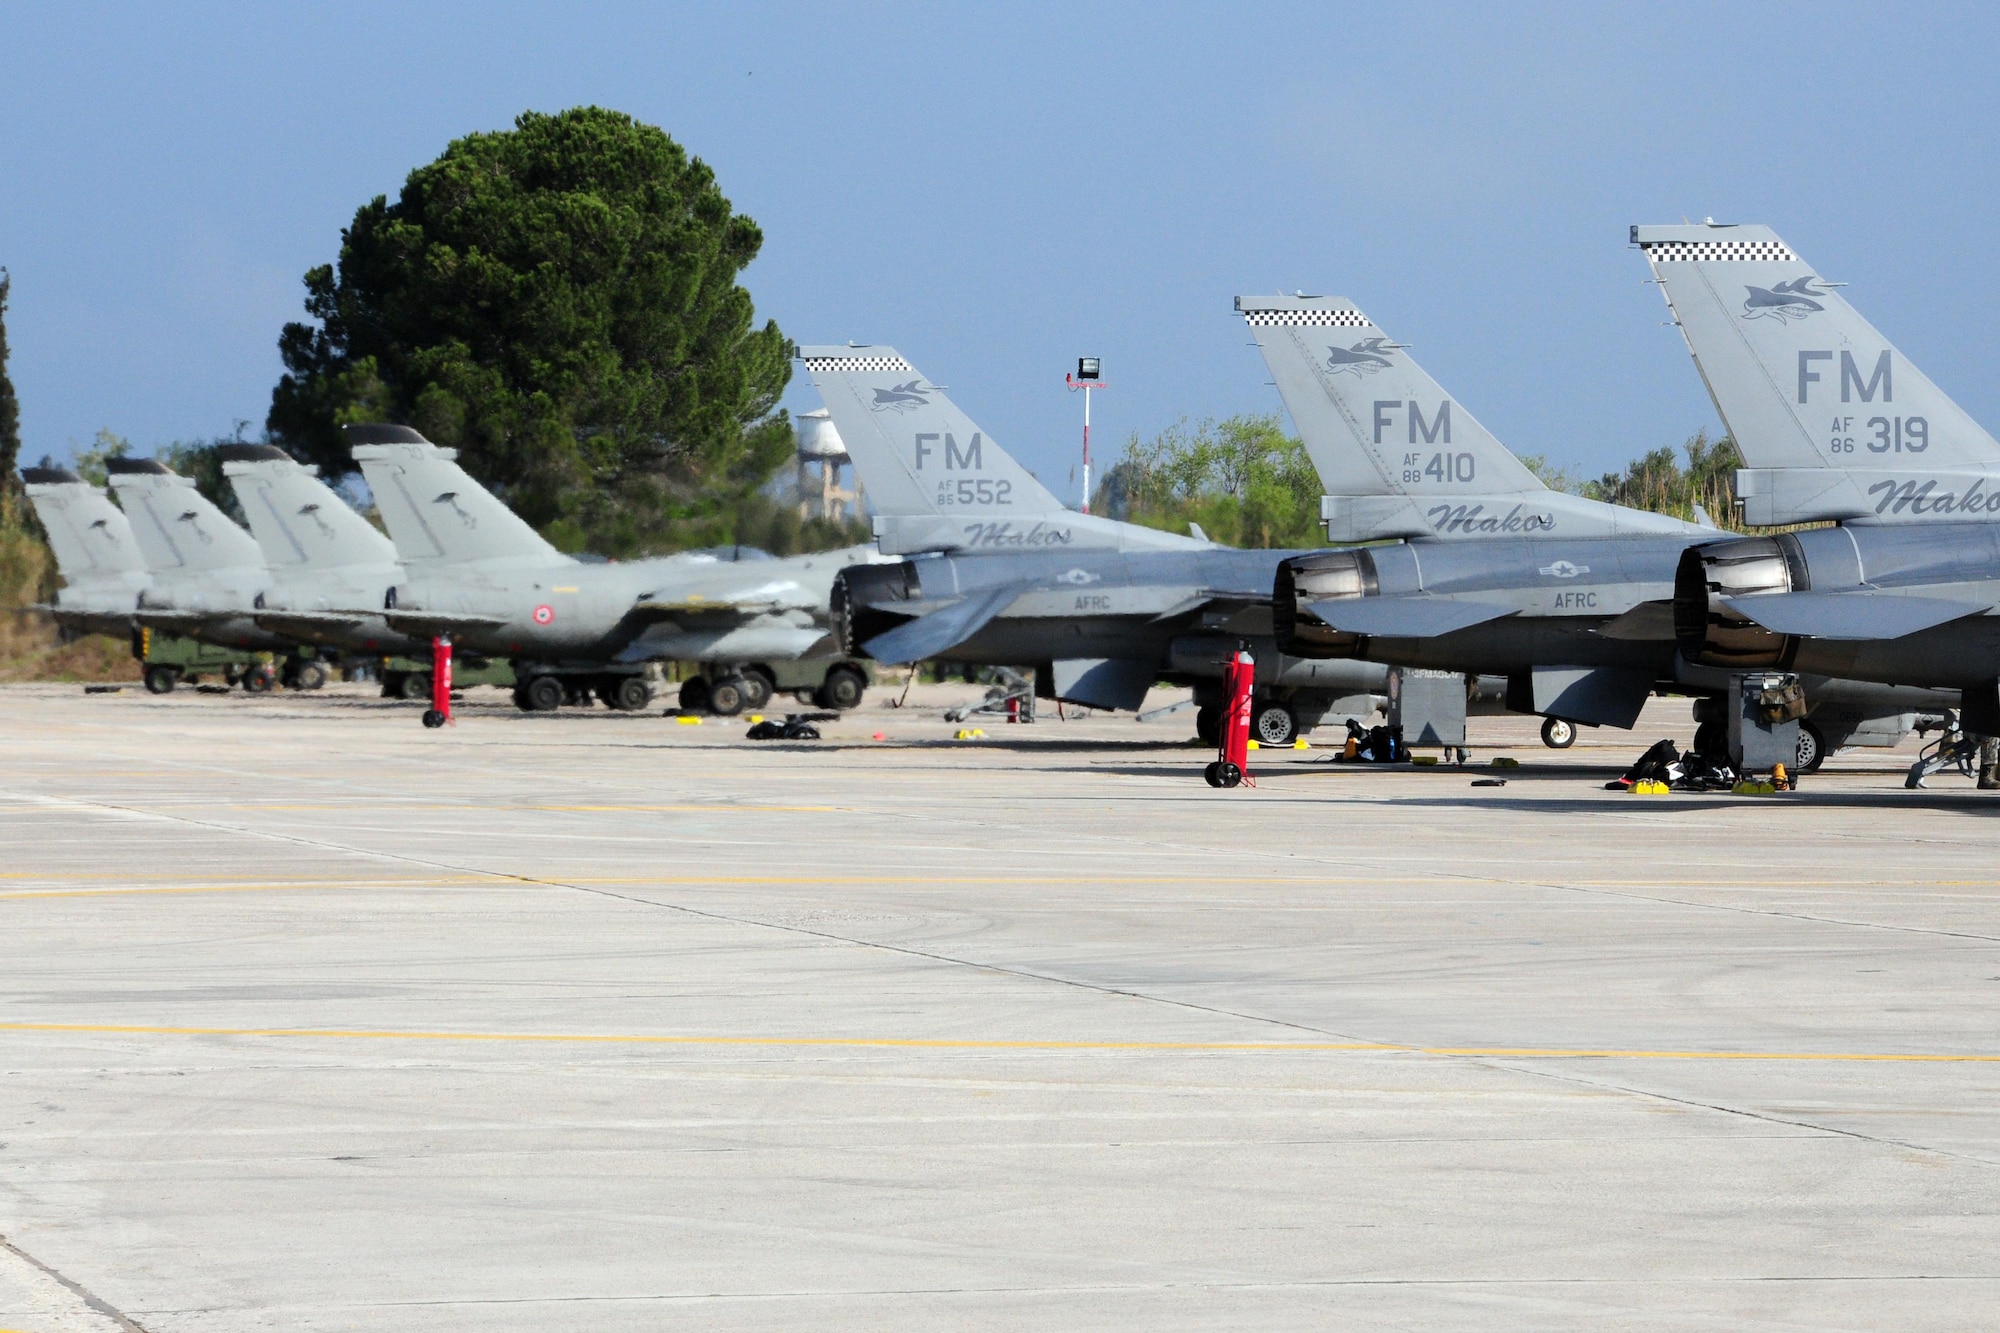 Italian and U.S. Air Force F-16Cs are parked on the flightline at Andravida Air Base Greece, Mar. 27, 2017 during INIOHOS 17.  The U.S. and Greece, as NATO allies, are participating in this exercise to promote peace and stability, and to seek opportunities to continue developing  a relationship. (U.S. Air Force photo by Staff Sgt. Ciara Gosier)